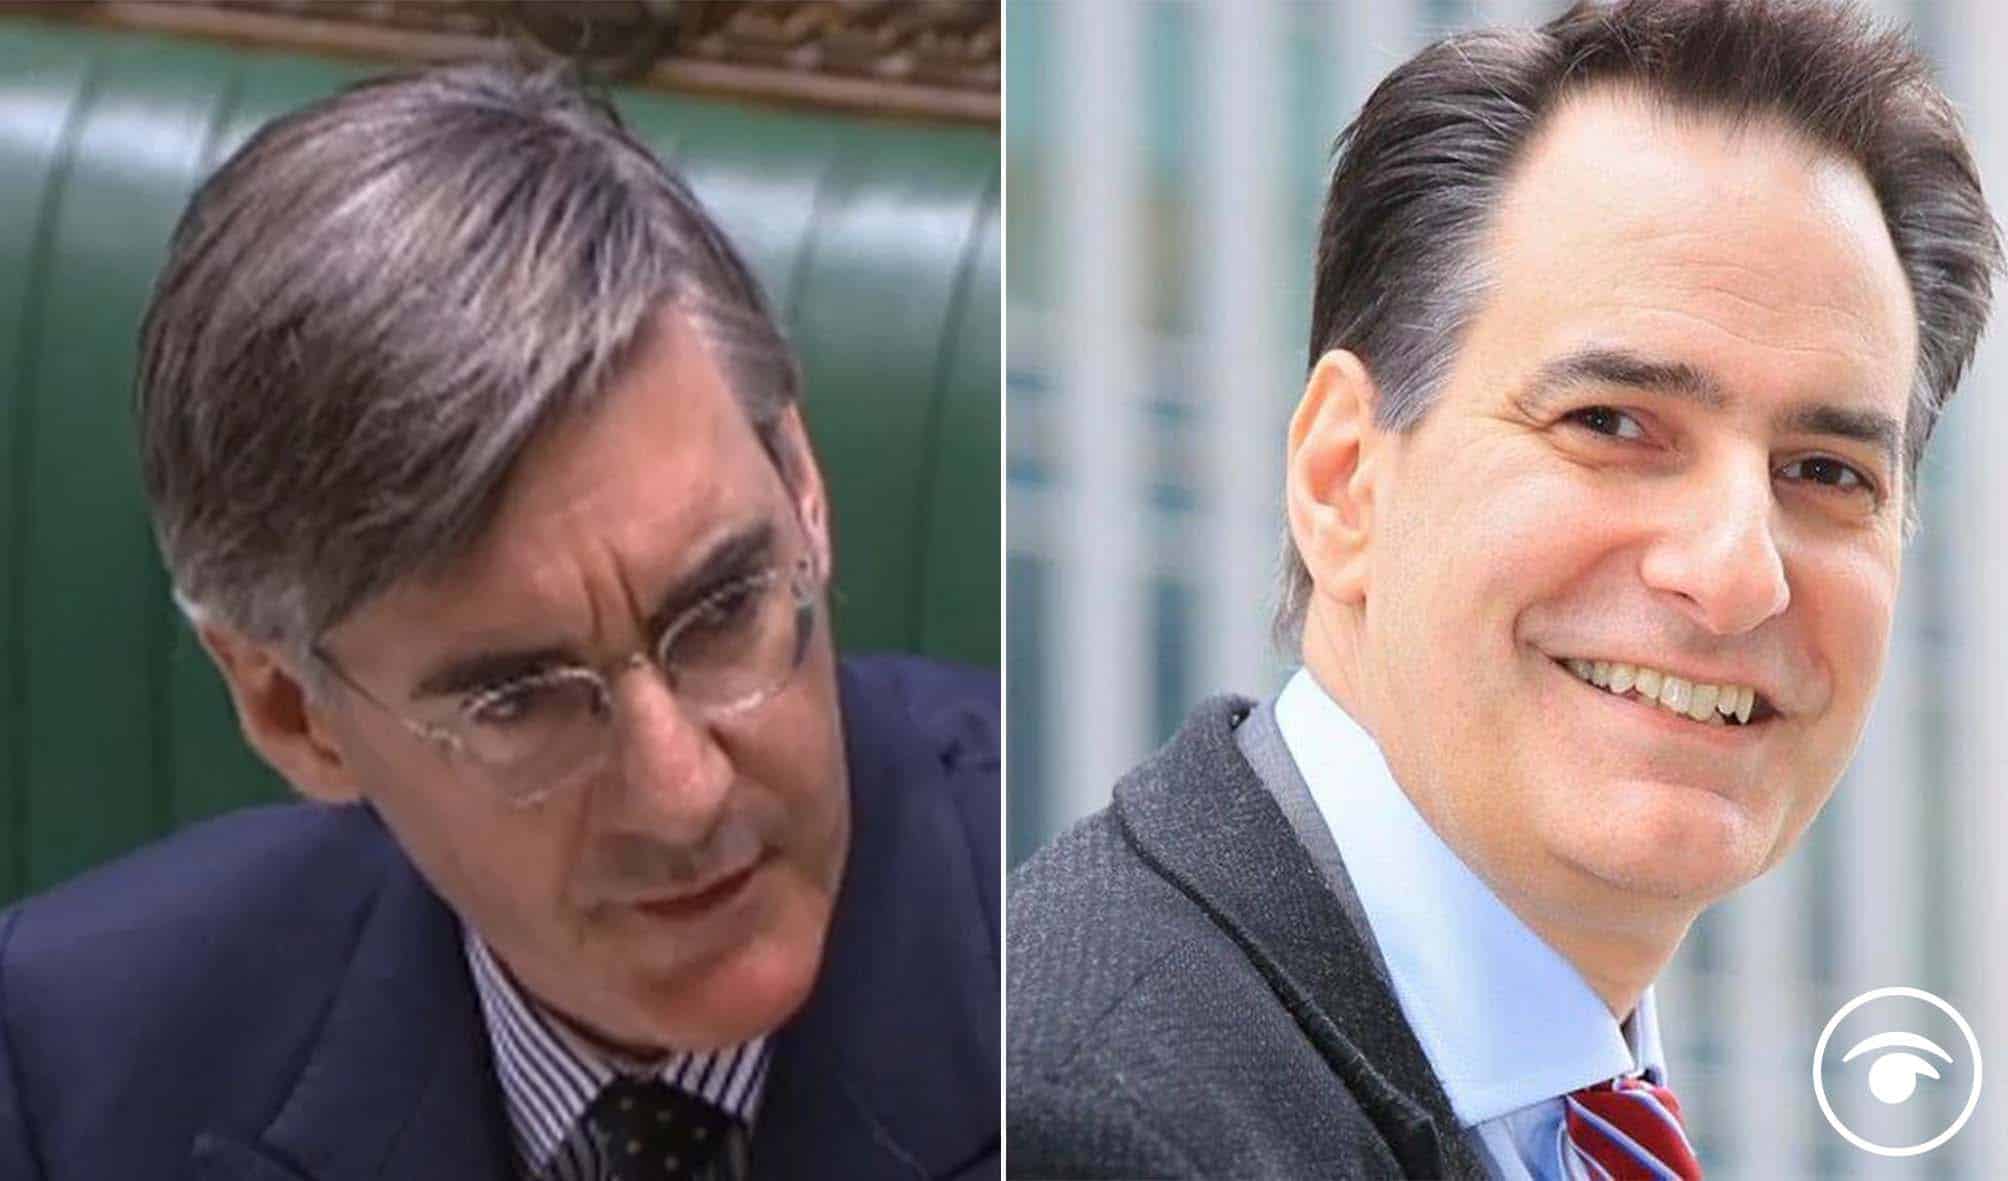 Watch: Viral video slams Rees-Mogg’s Brexit benefits claims